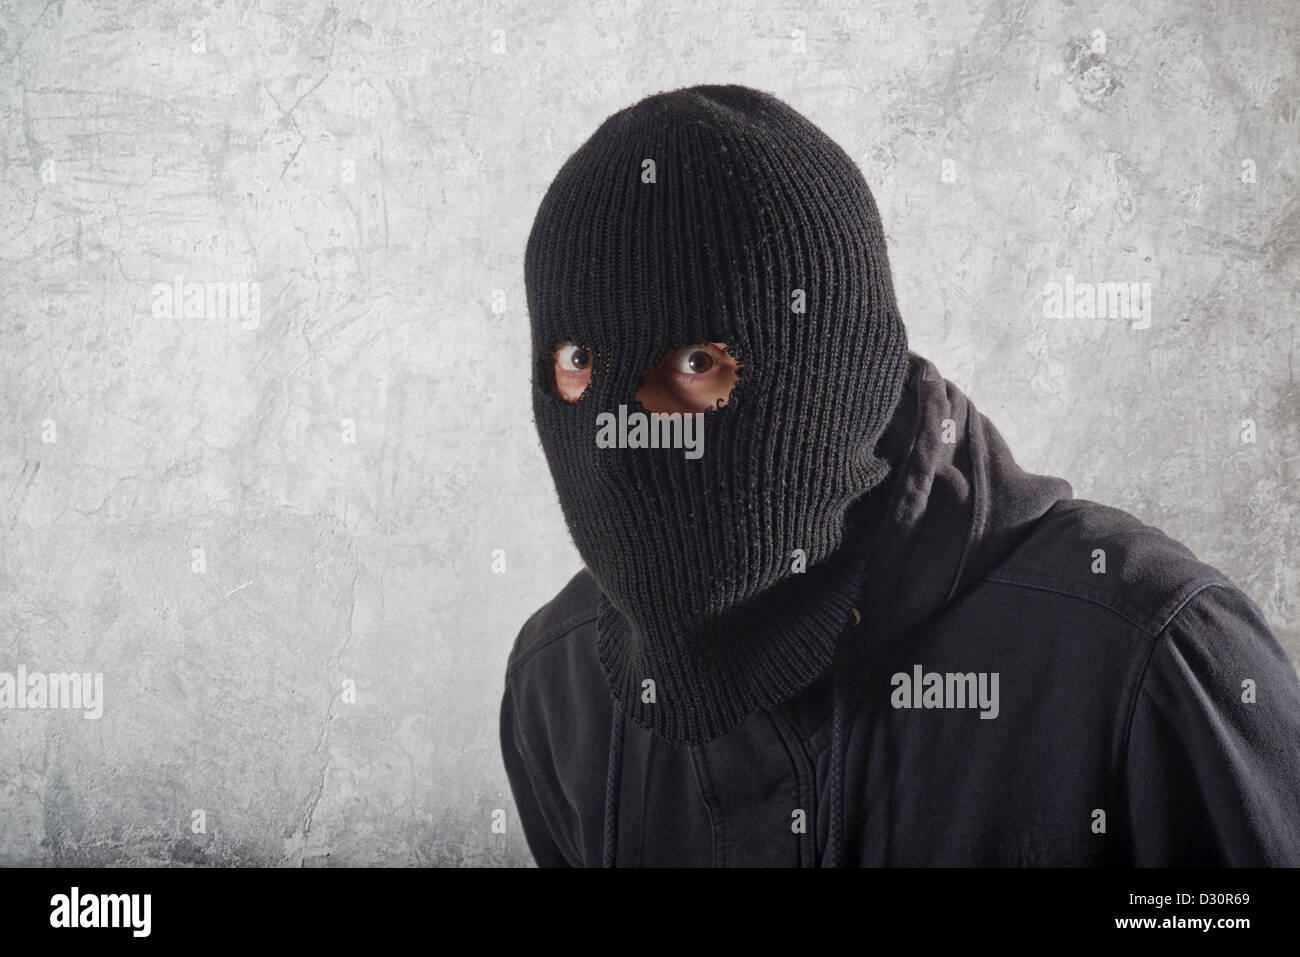 Burglar concept, thief with balaclava caught in front of the grunge concrete wall. Stock Photo